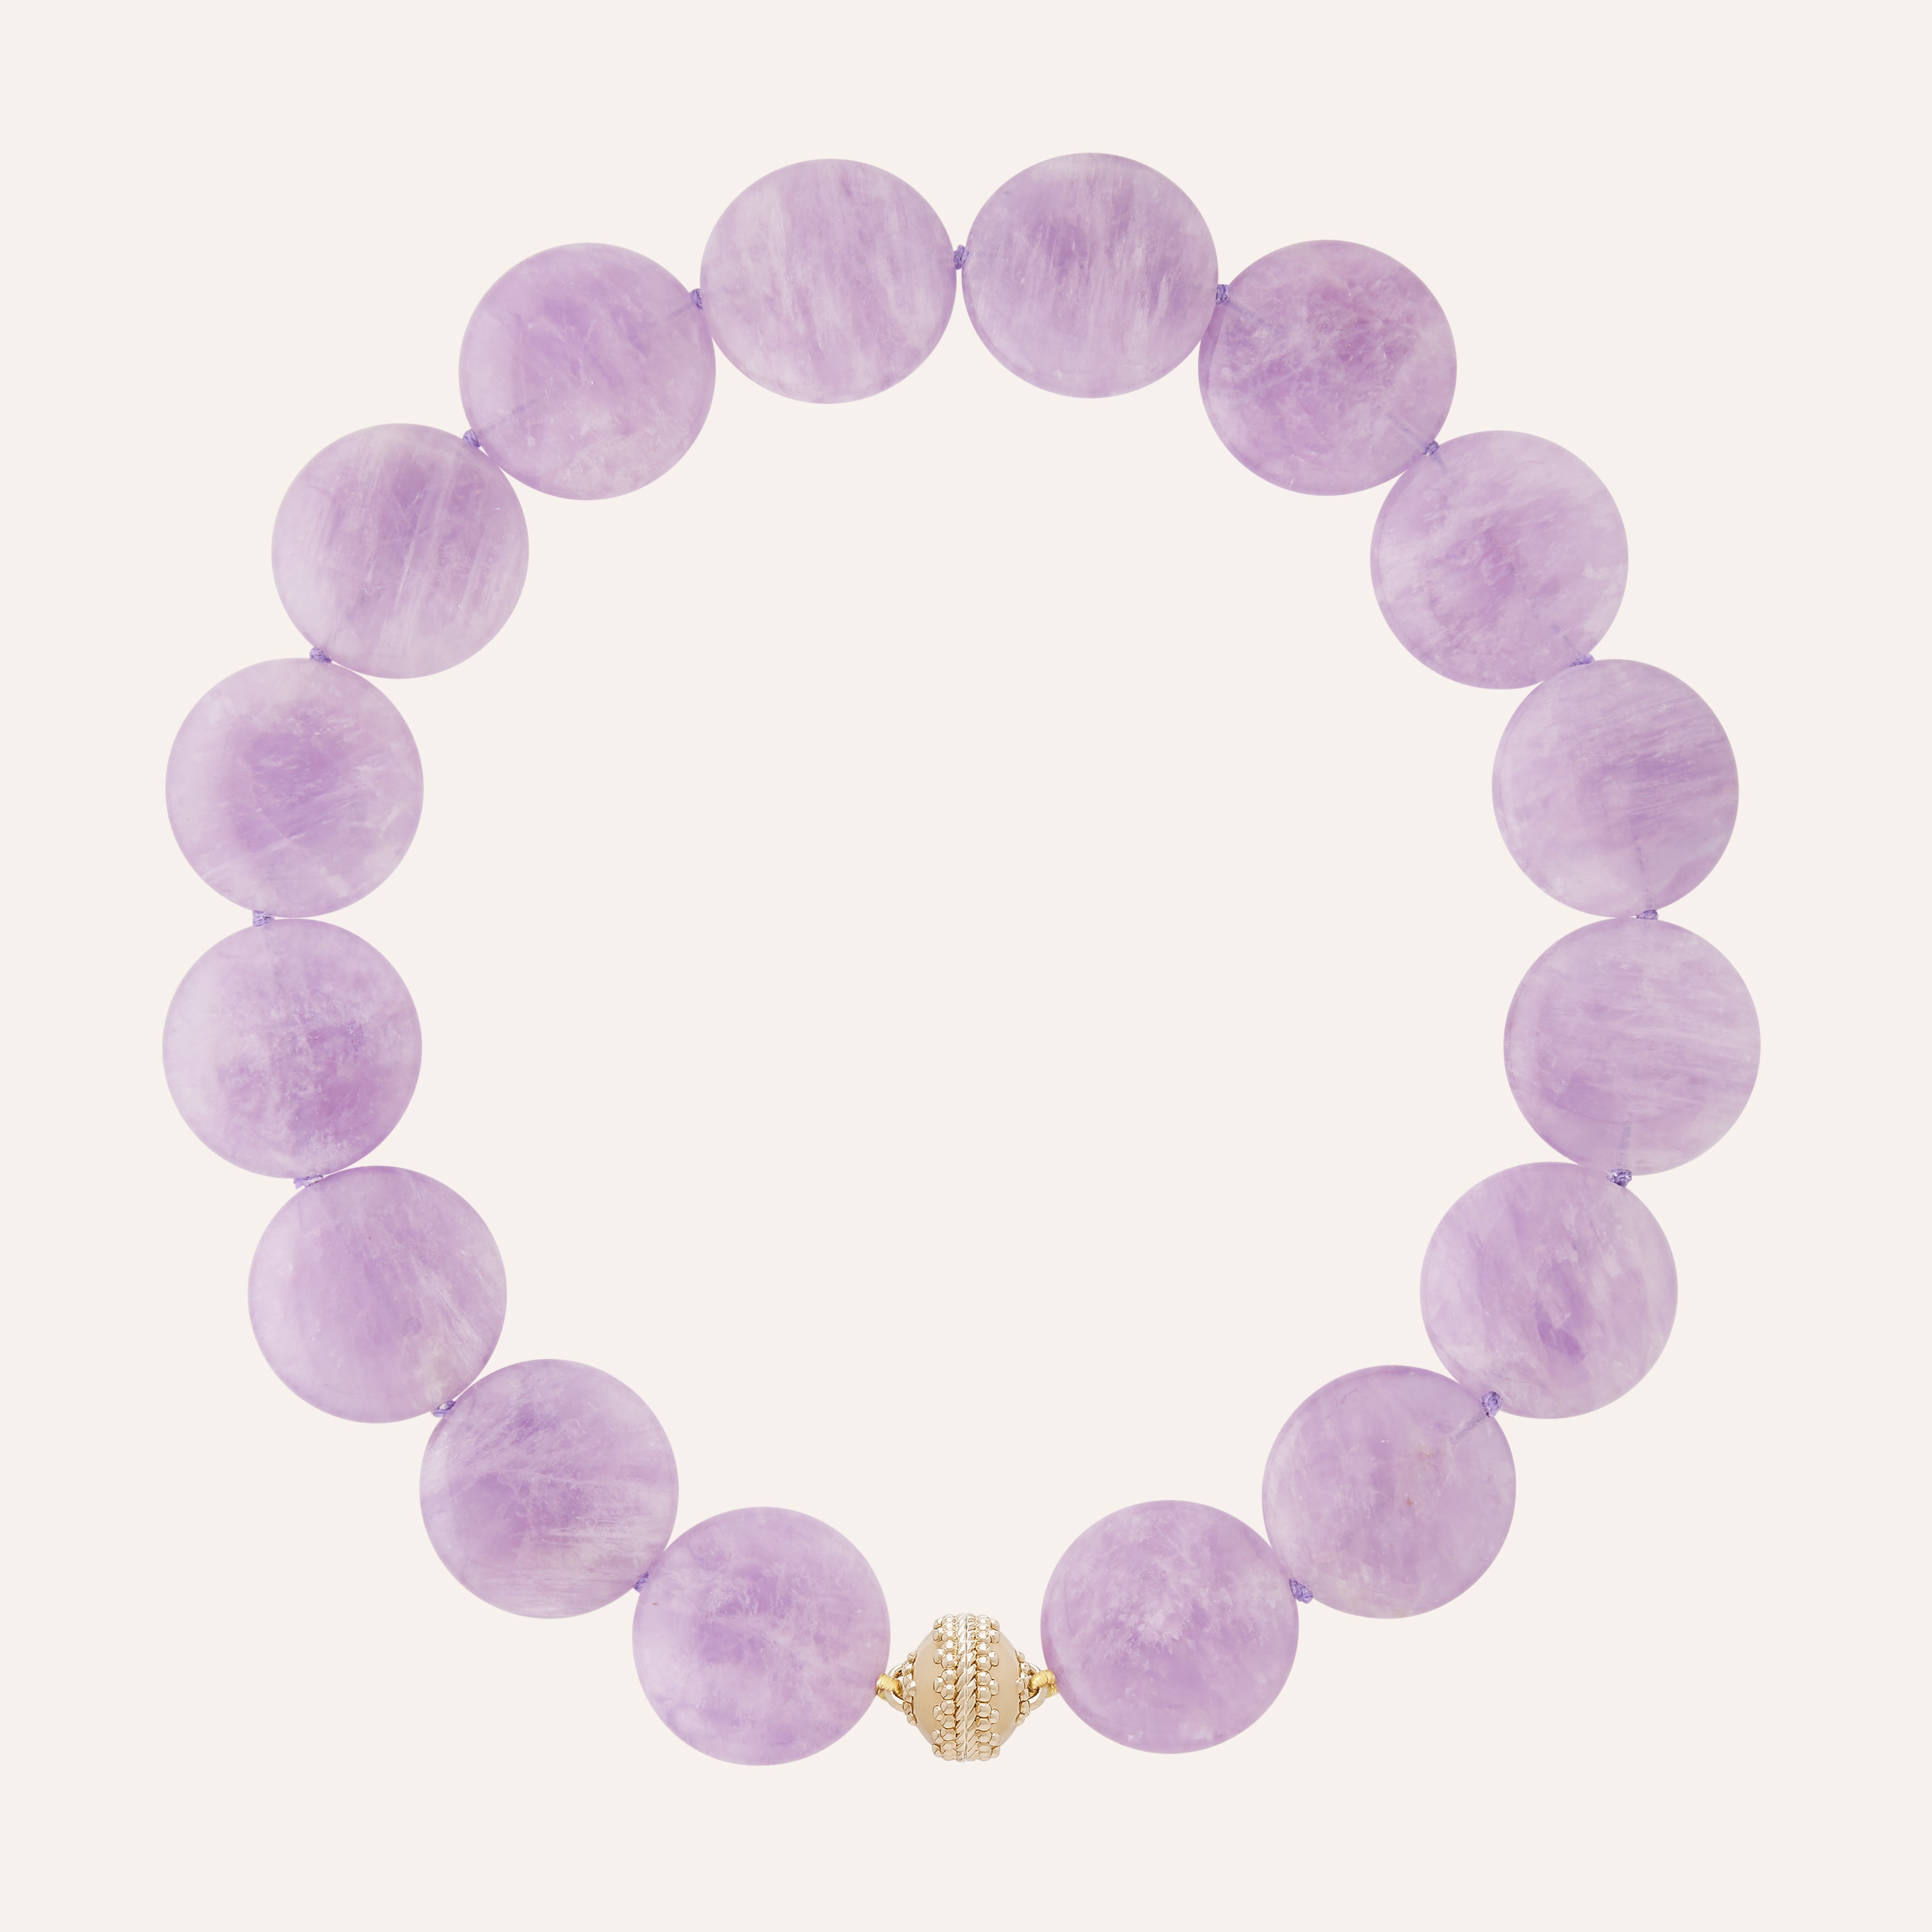 Amethyst 25mm Round Coin Bead Necklace